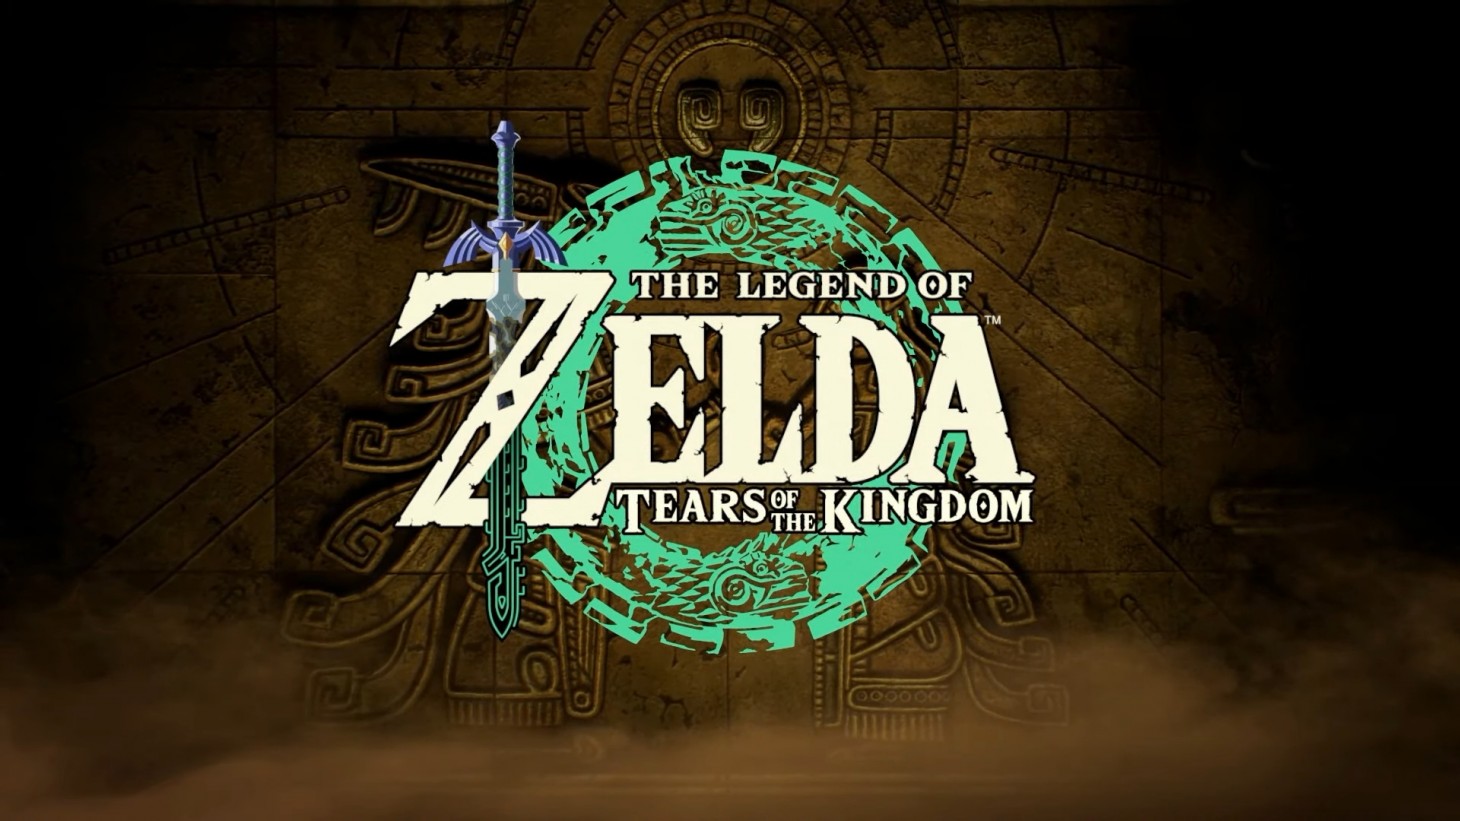 The Legend of Zelda: Tears Of The Kingdom - The Story Of The Dragons